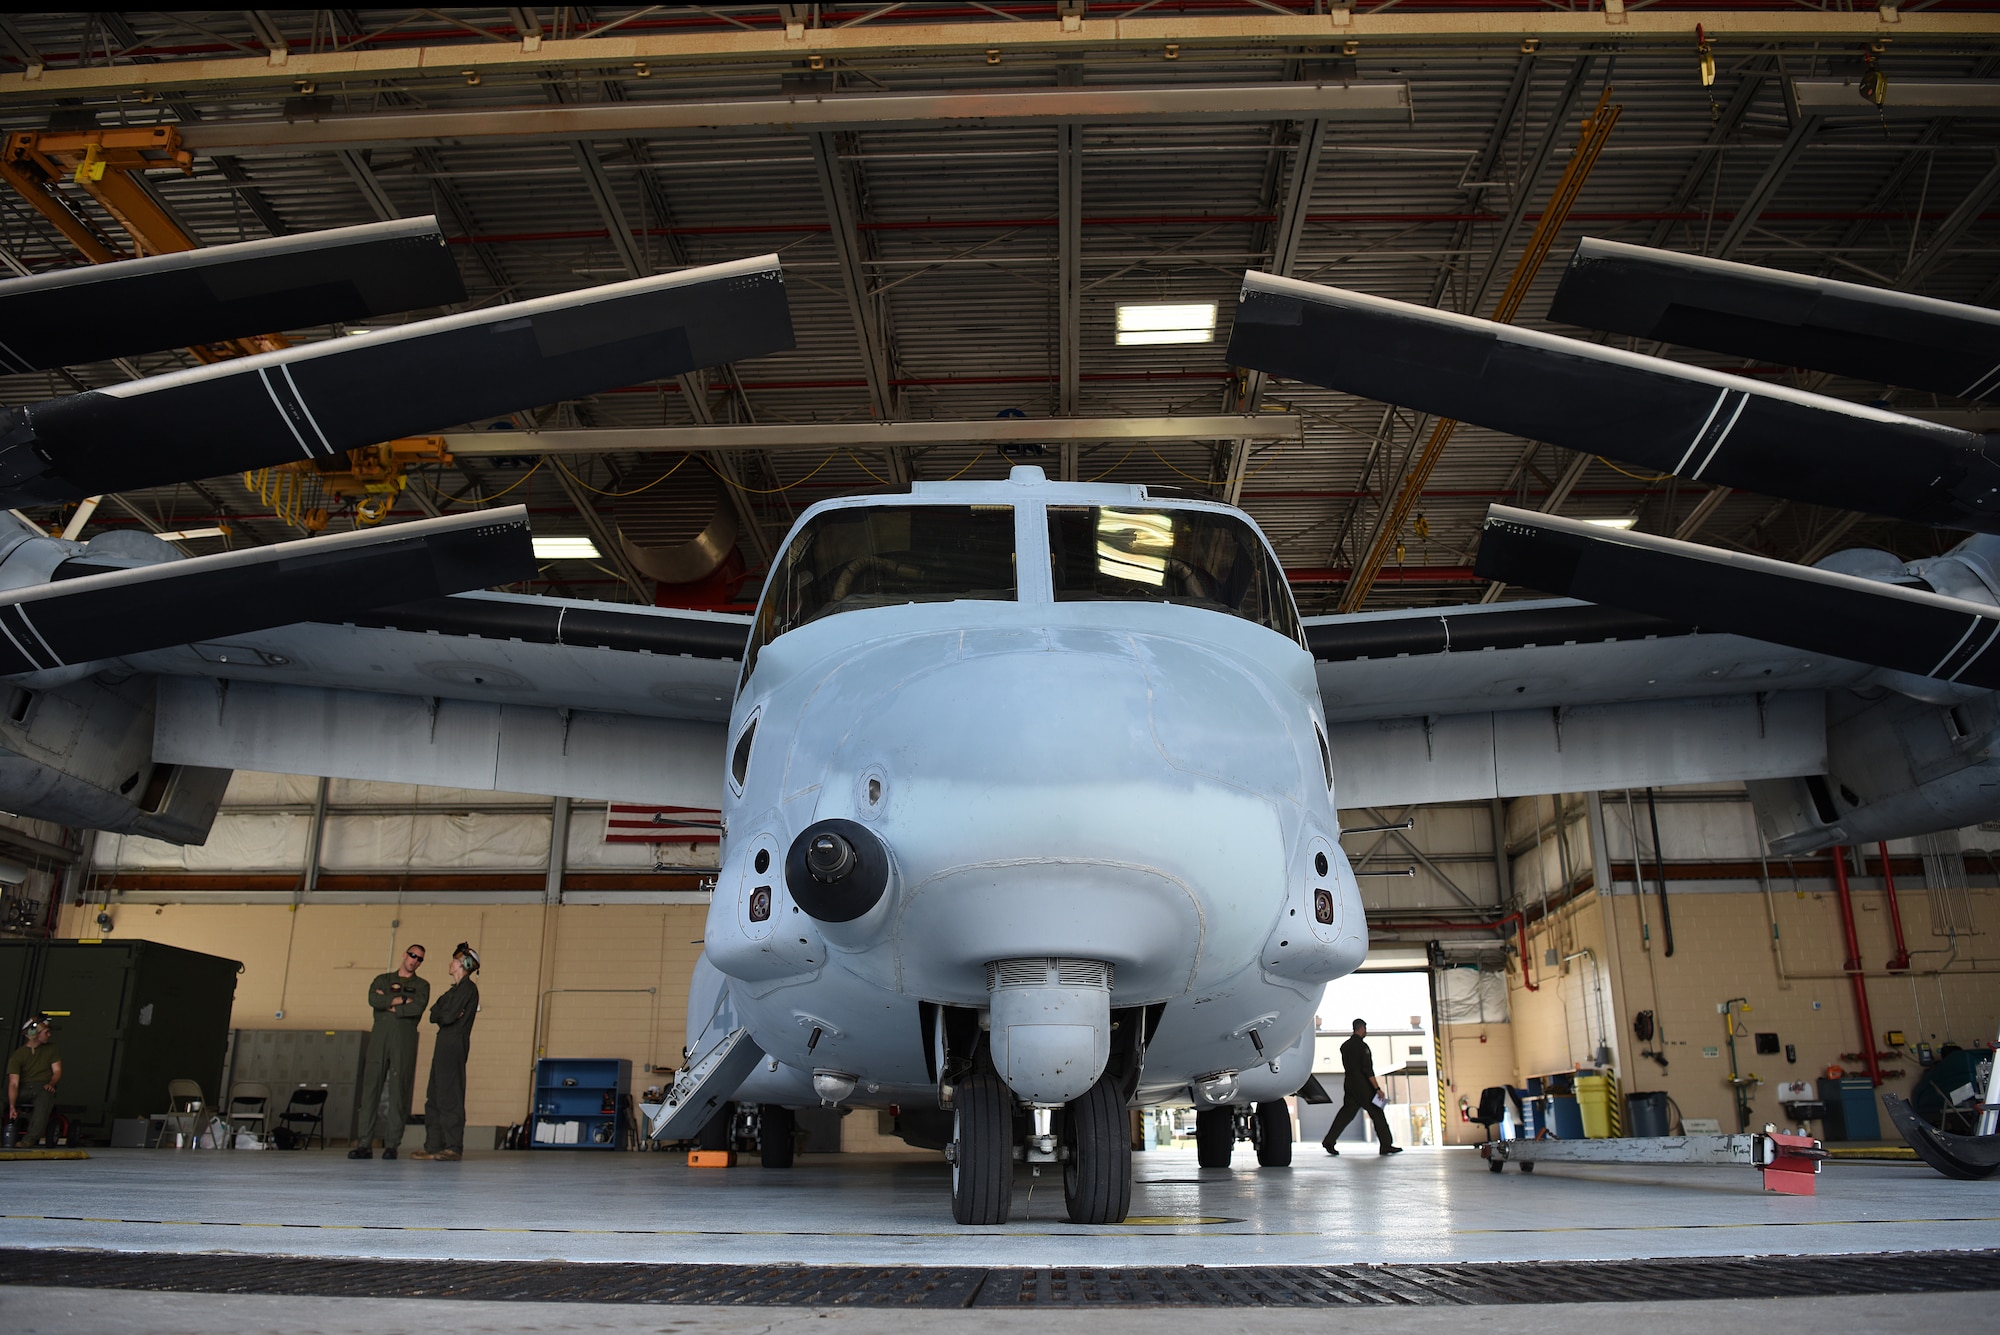 An MV-22B Osprey is parked inside a hangar at Keesler Air Force Base, Mississippi, Oct. 23, 2020. Marines came to Keesler to conduct routine training operations in and around the Mississippi area. (U.S. Air Force photo by Senior Airman Suzie Plotnikov)